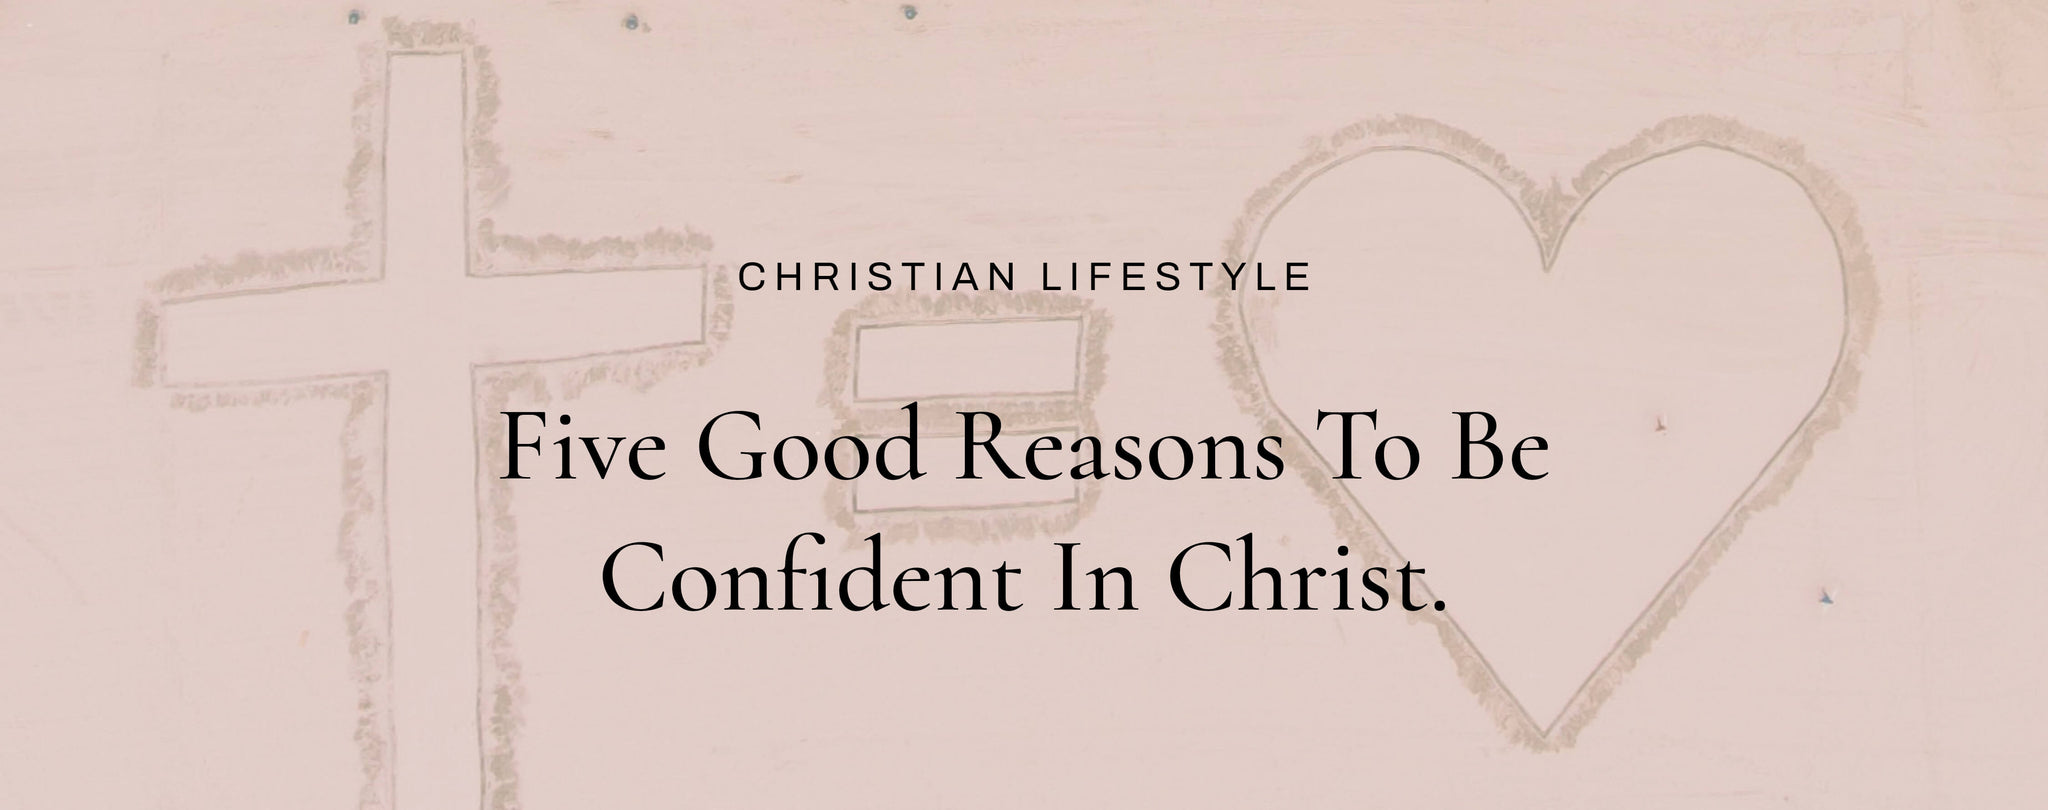 being confident in christ